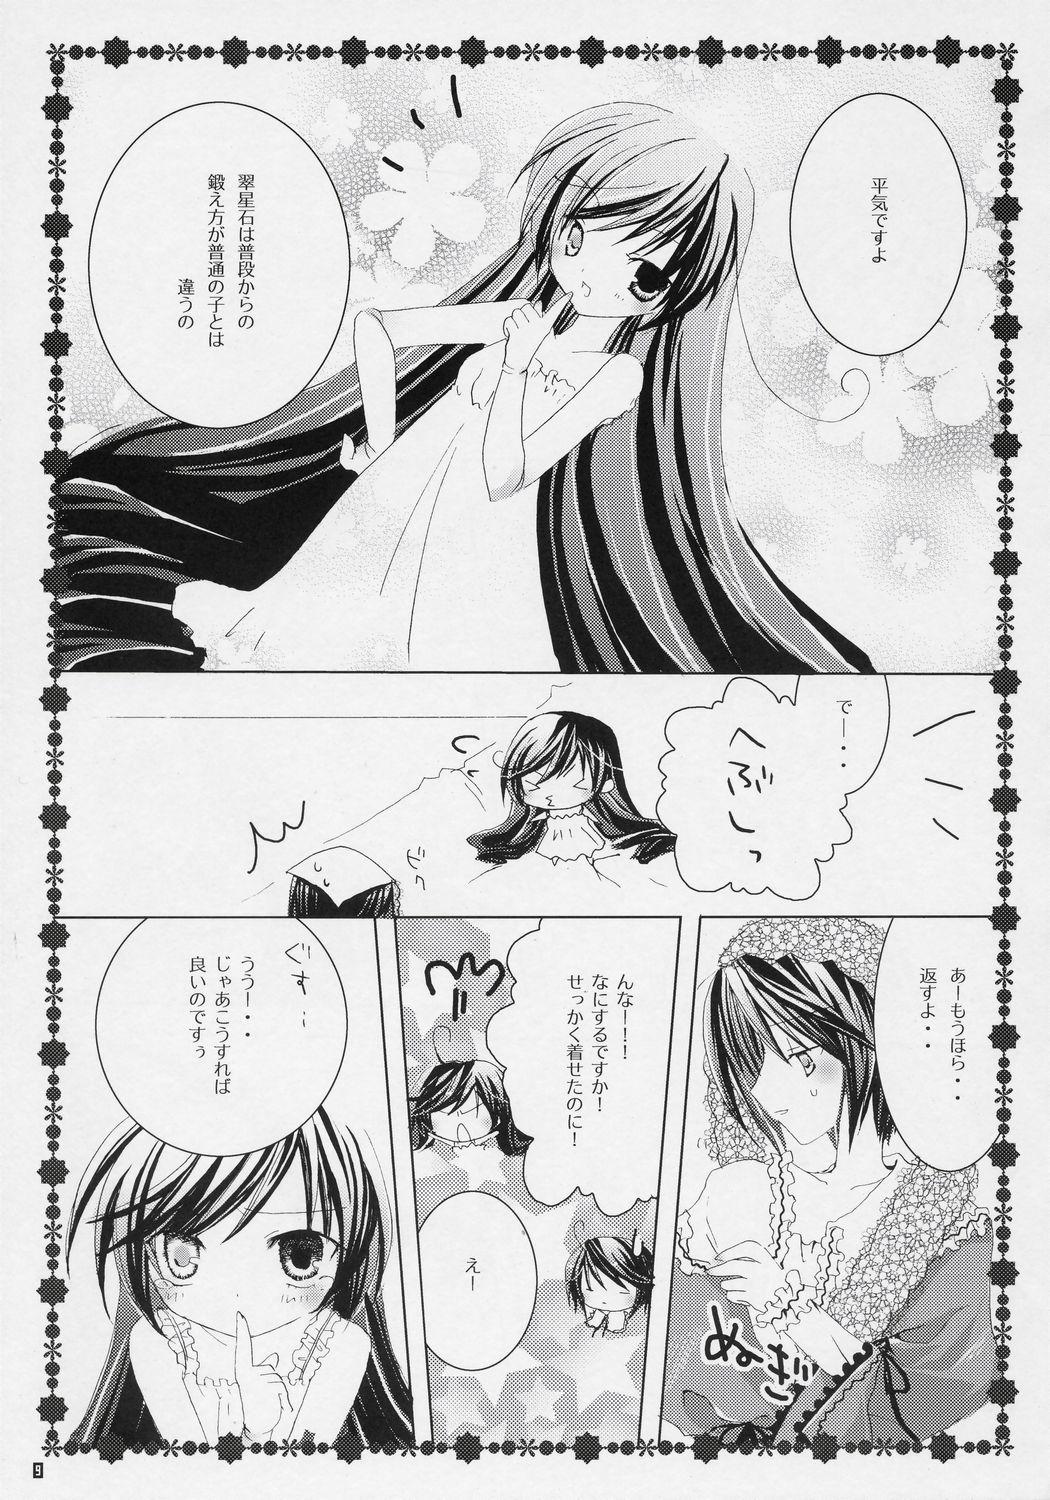 Anal Sex TwinBerry - Rozen maiden Young - Page 8